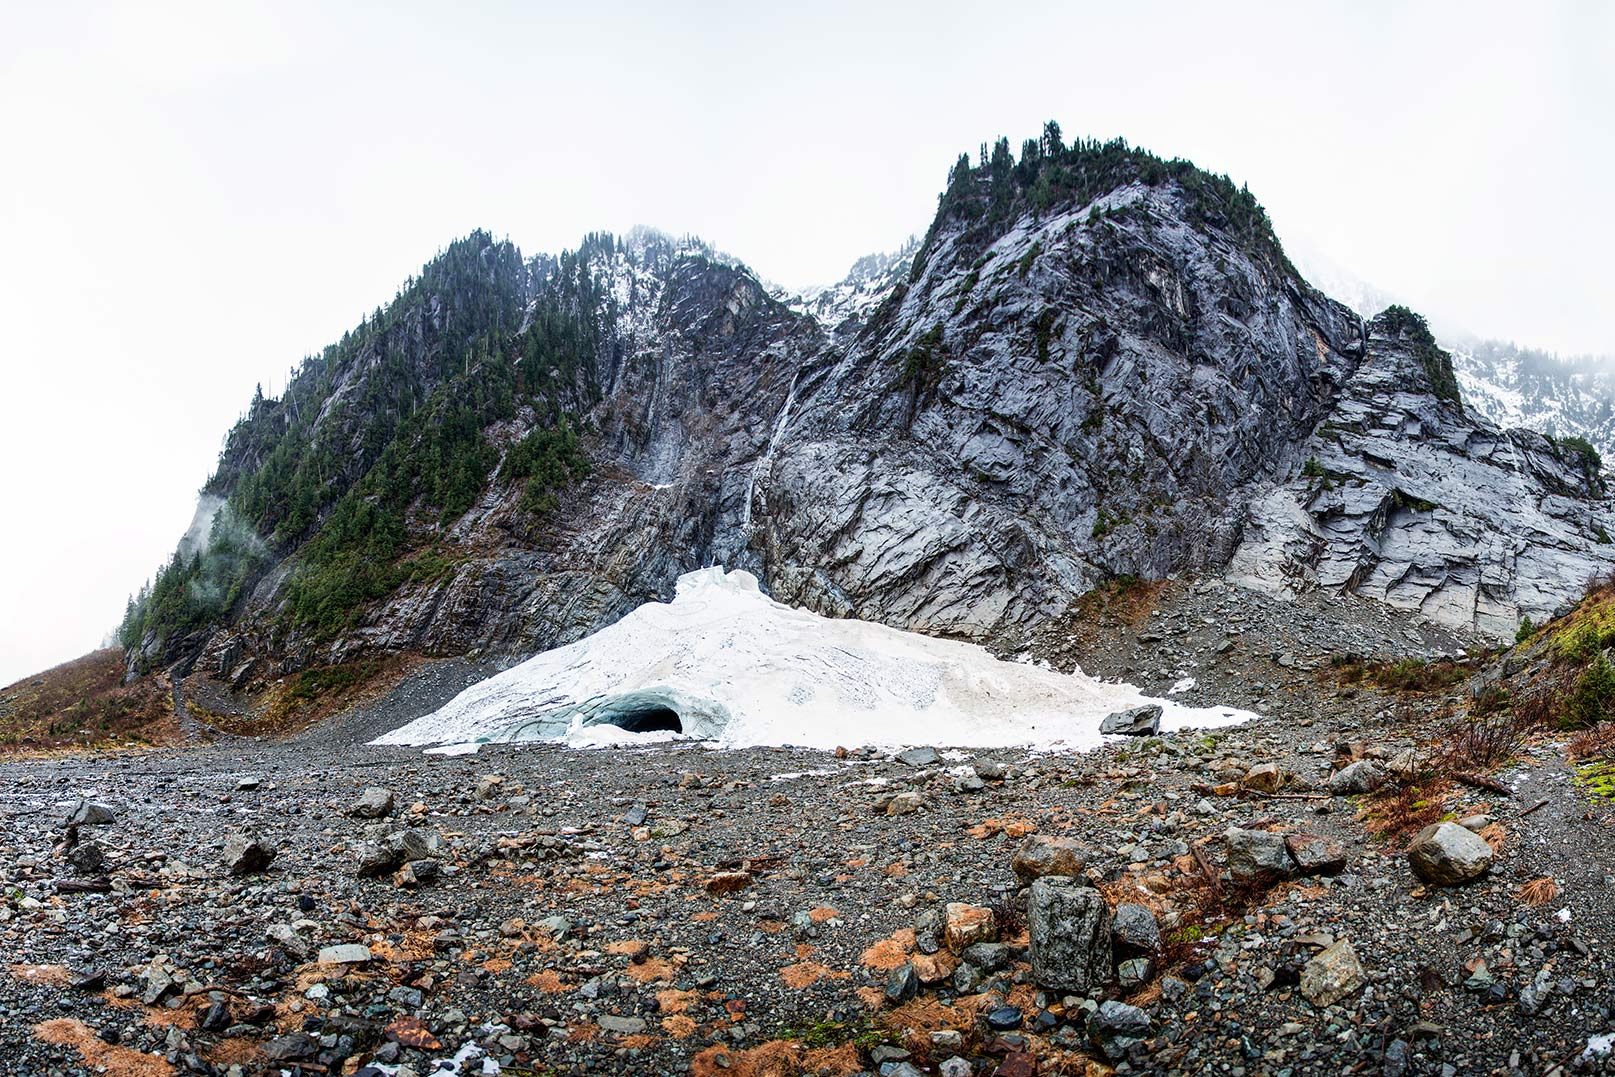 A picture of the ice cave from outside